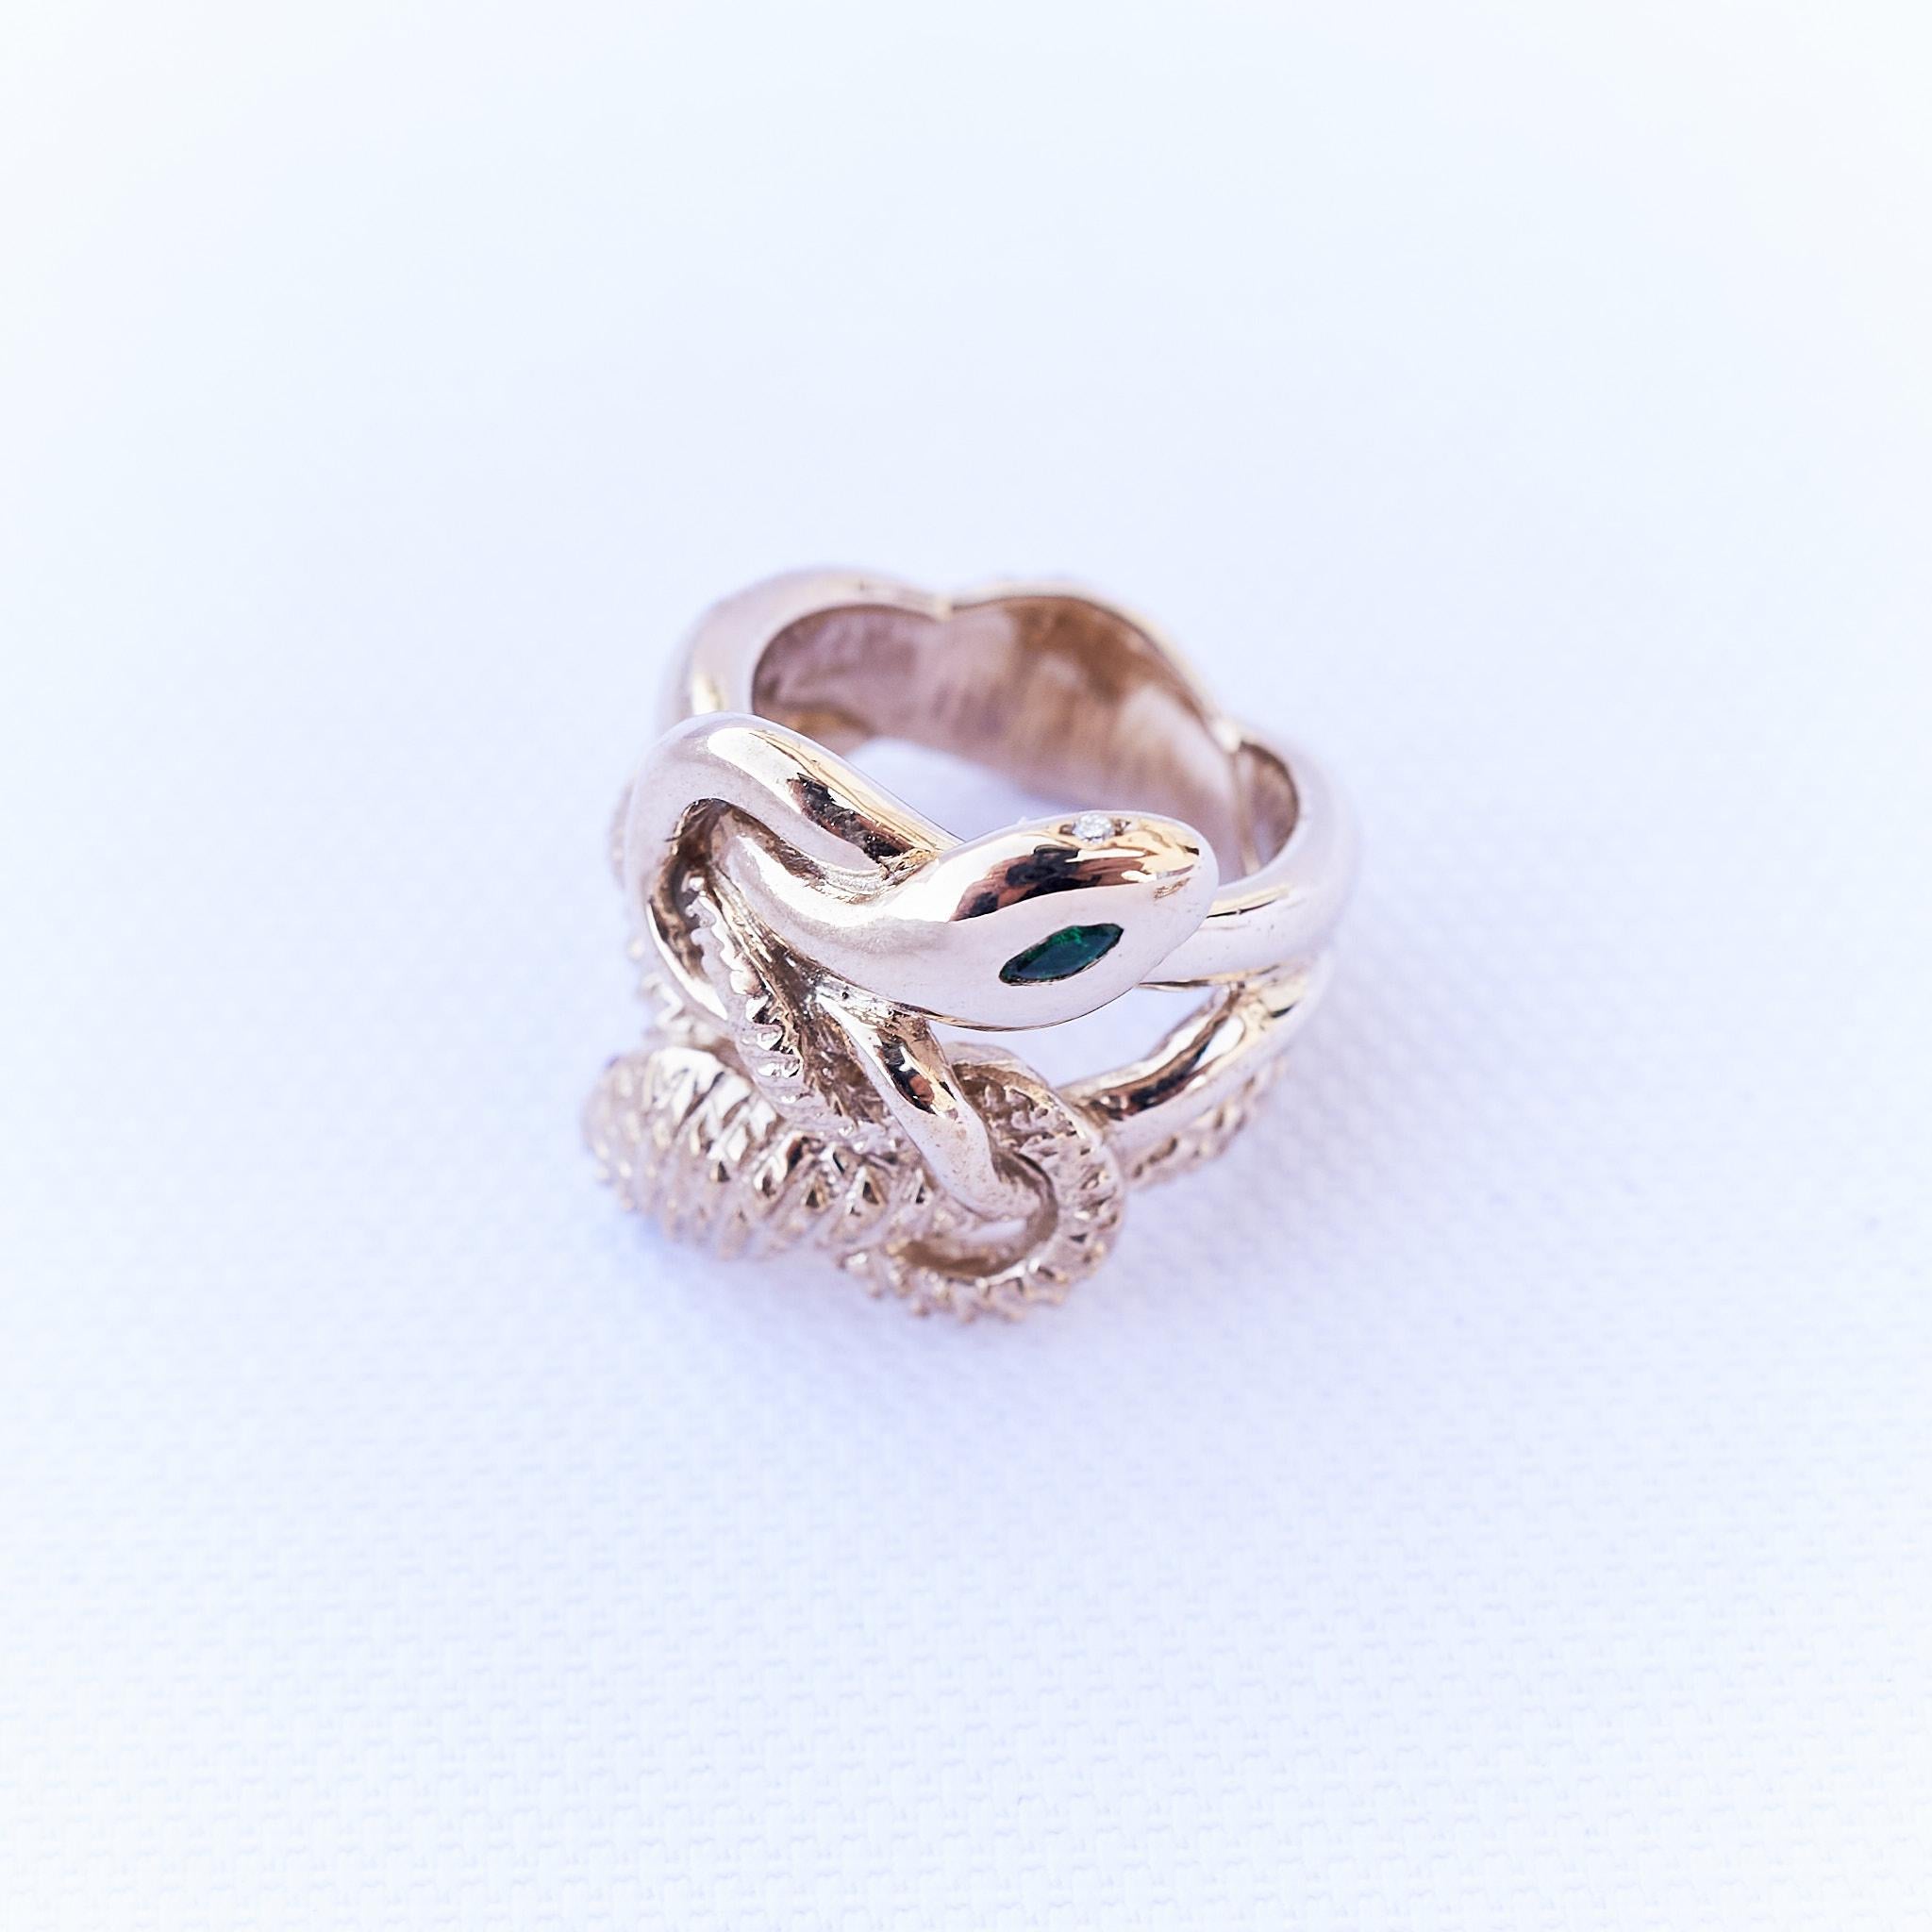 Animal Jewelry Emerald Marquis White Diamond Ruby Snake Ring Cocktail Ring Bronze J Dauphin
Style: Cocktail Ring 
Material: Polished Bronze 
Designer: J Dauphin

J DAUPHIN 